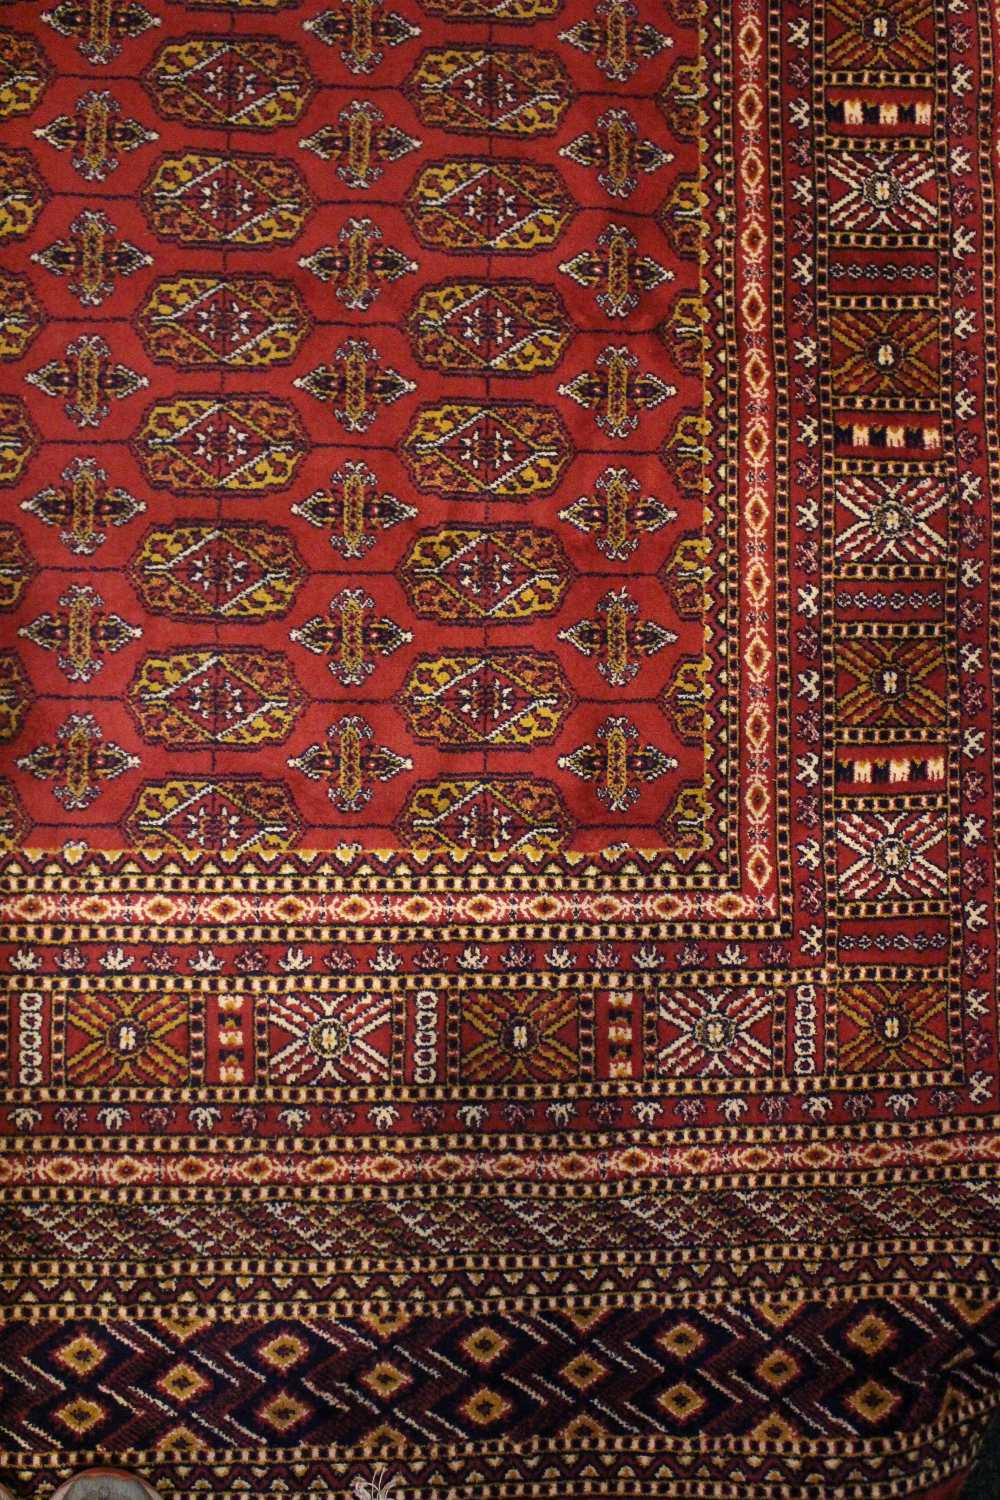 A BOKHARA STYLE FLOOR RUG, with red main ground, multi borders, 94" x 63" approx - Image 2 of 2